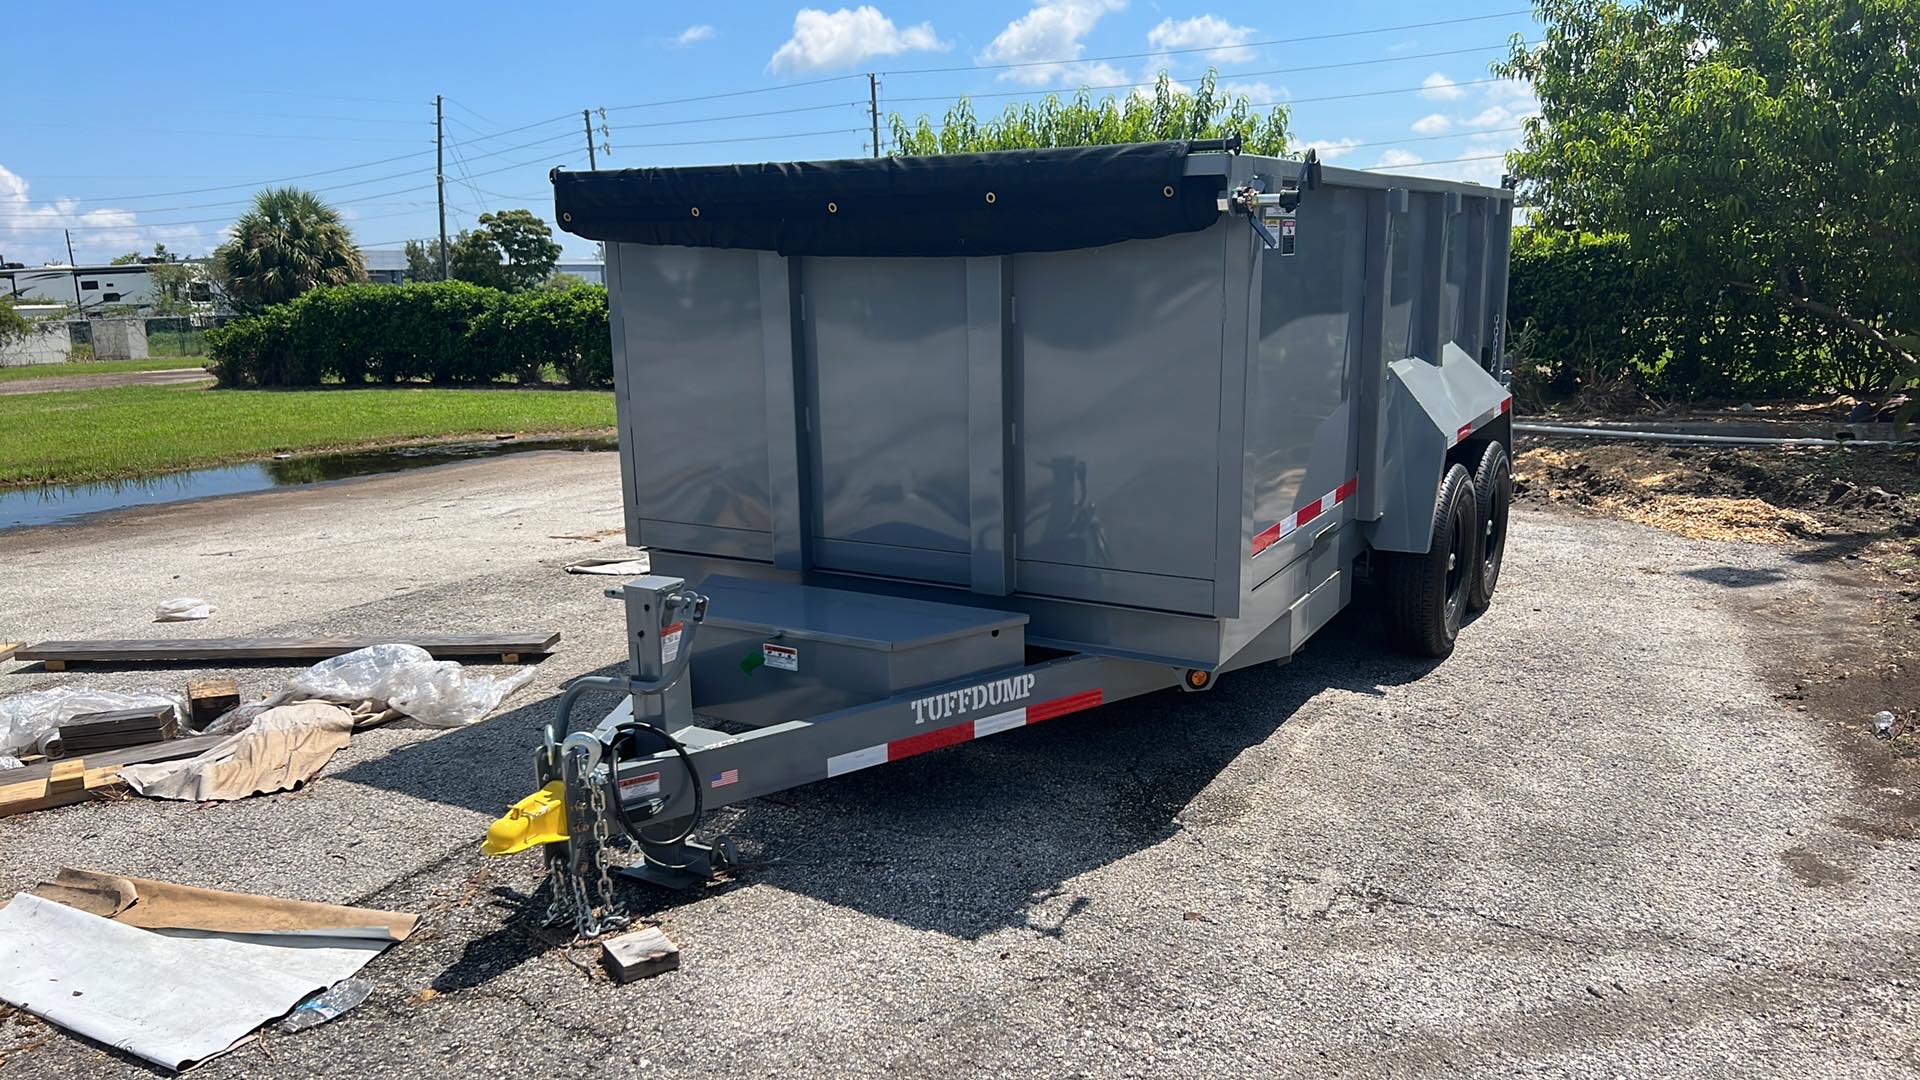 14 Foot Tuff Dump with Spreader Gate and High Sides Gray Dump Trailer (TD-14HS)